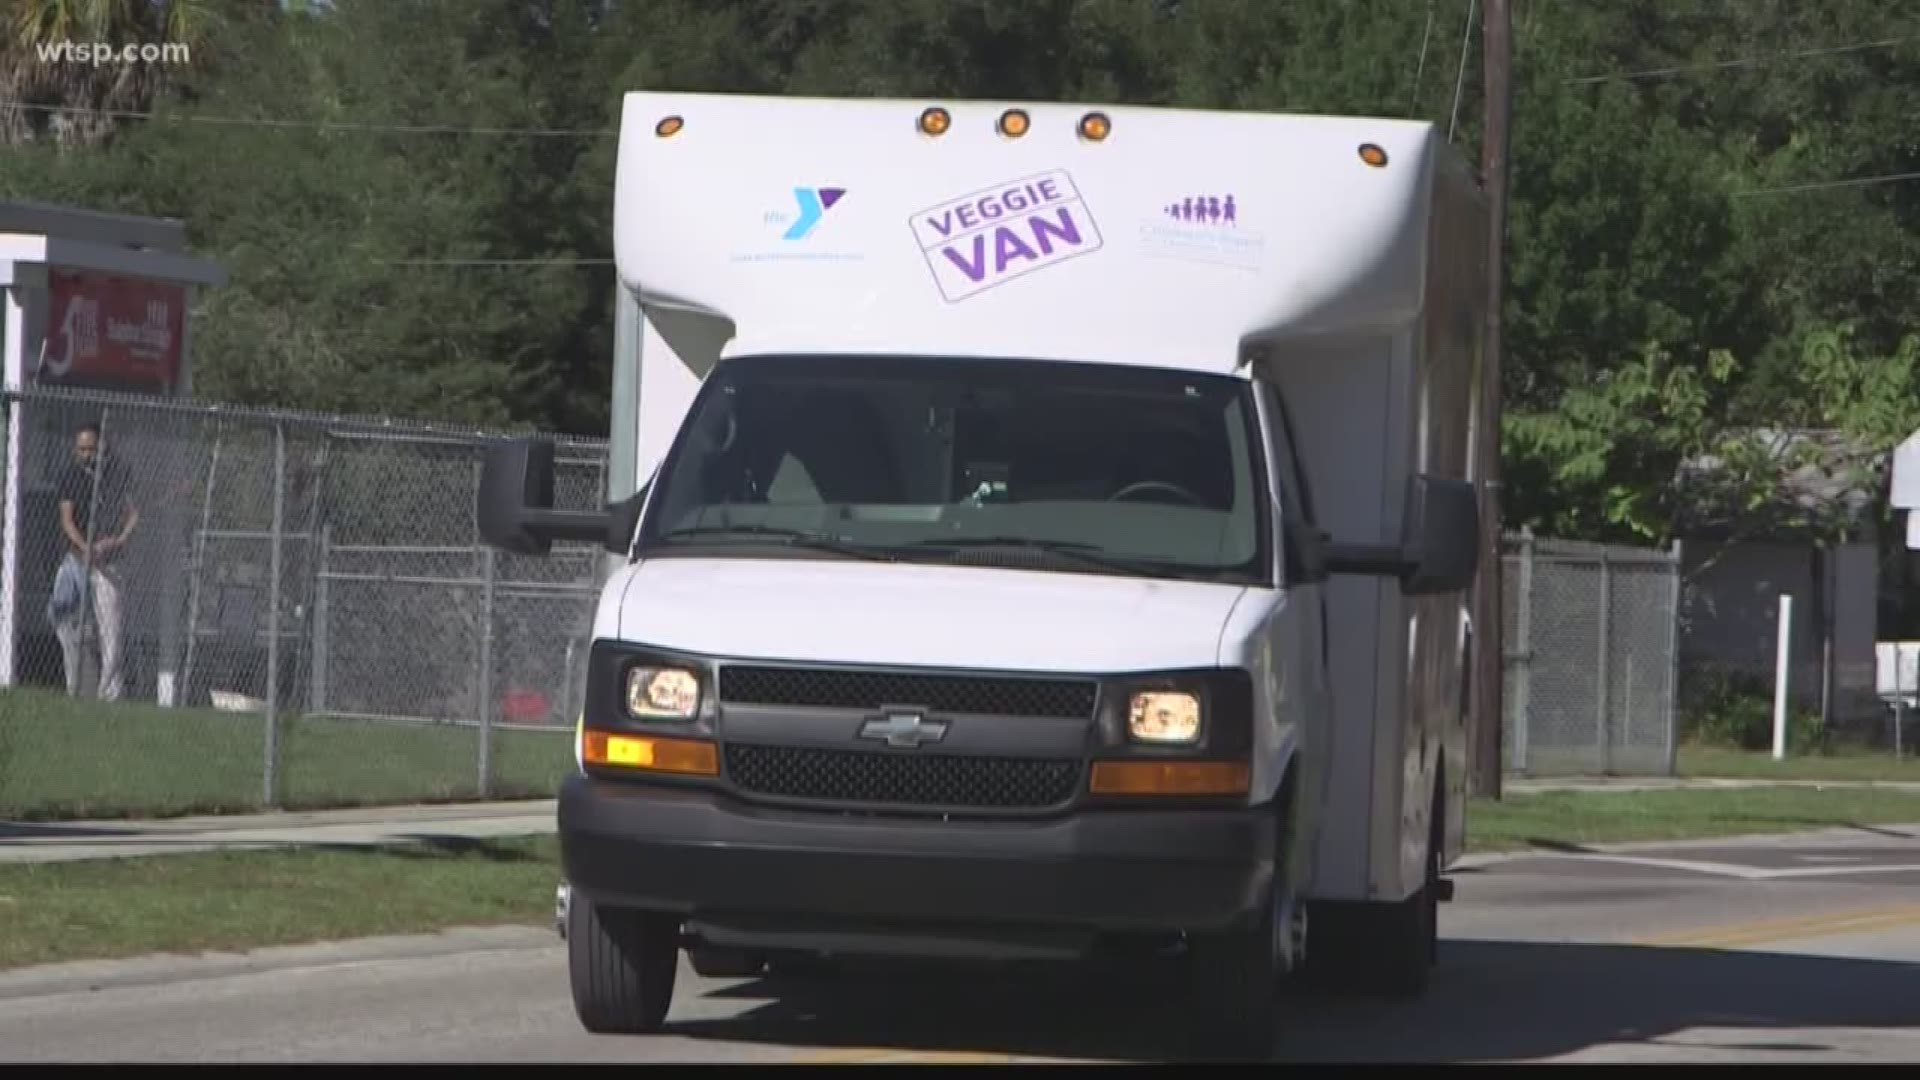 The Tampa YMCA Veggie Van serves individuals and families who qualify.